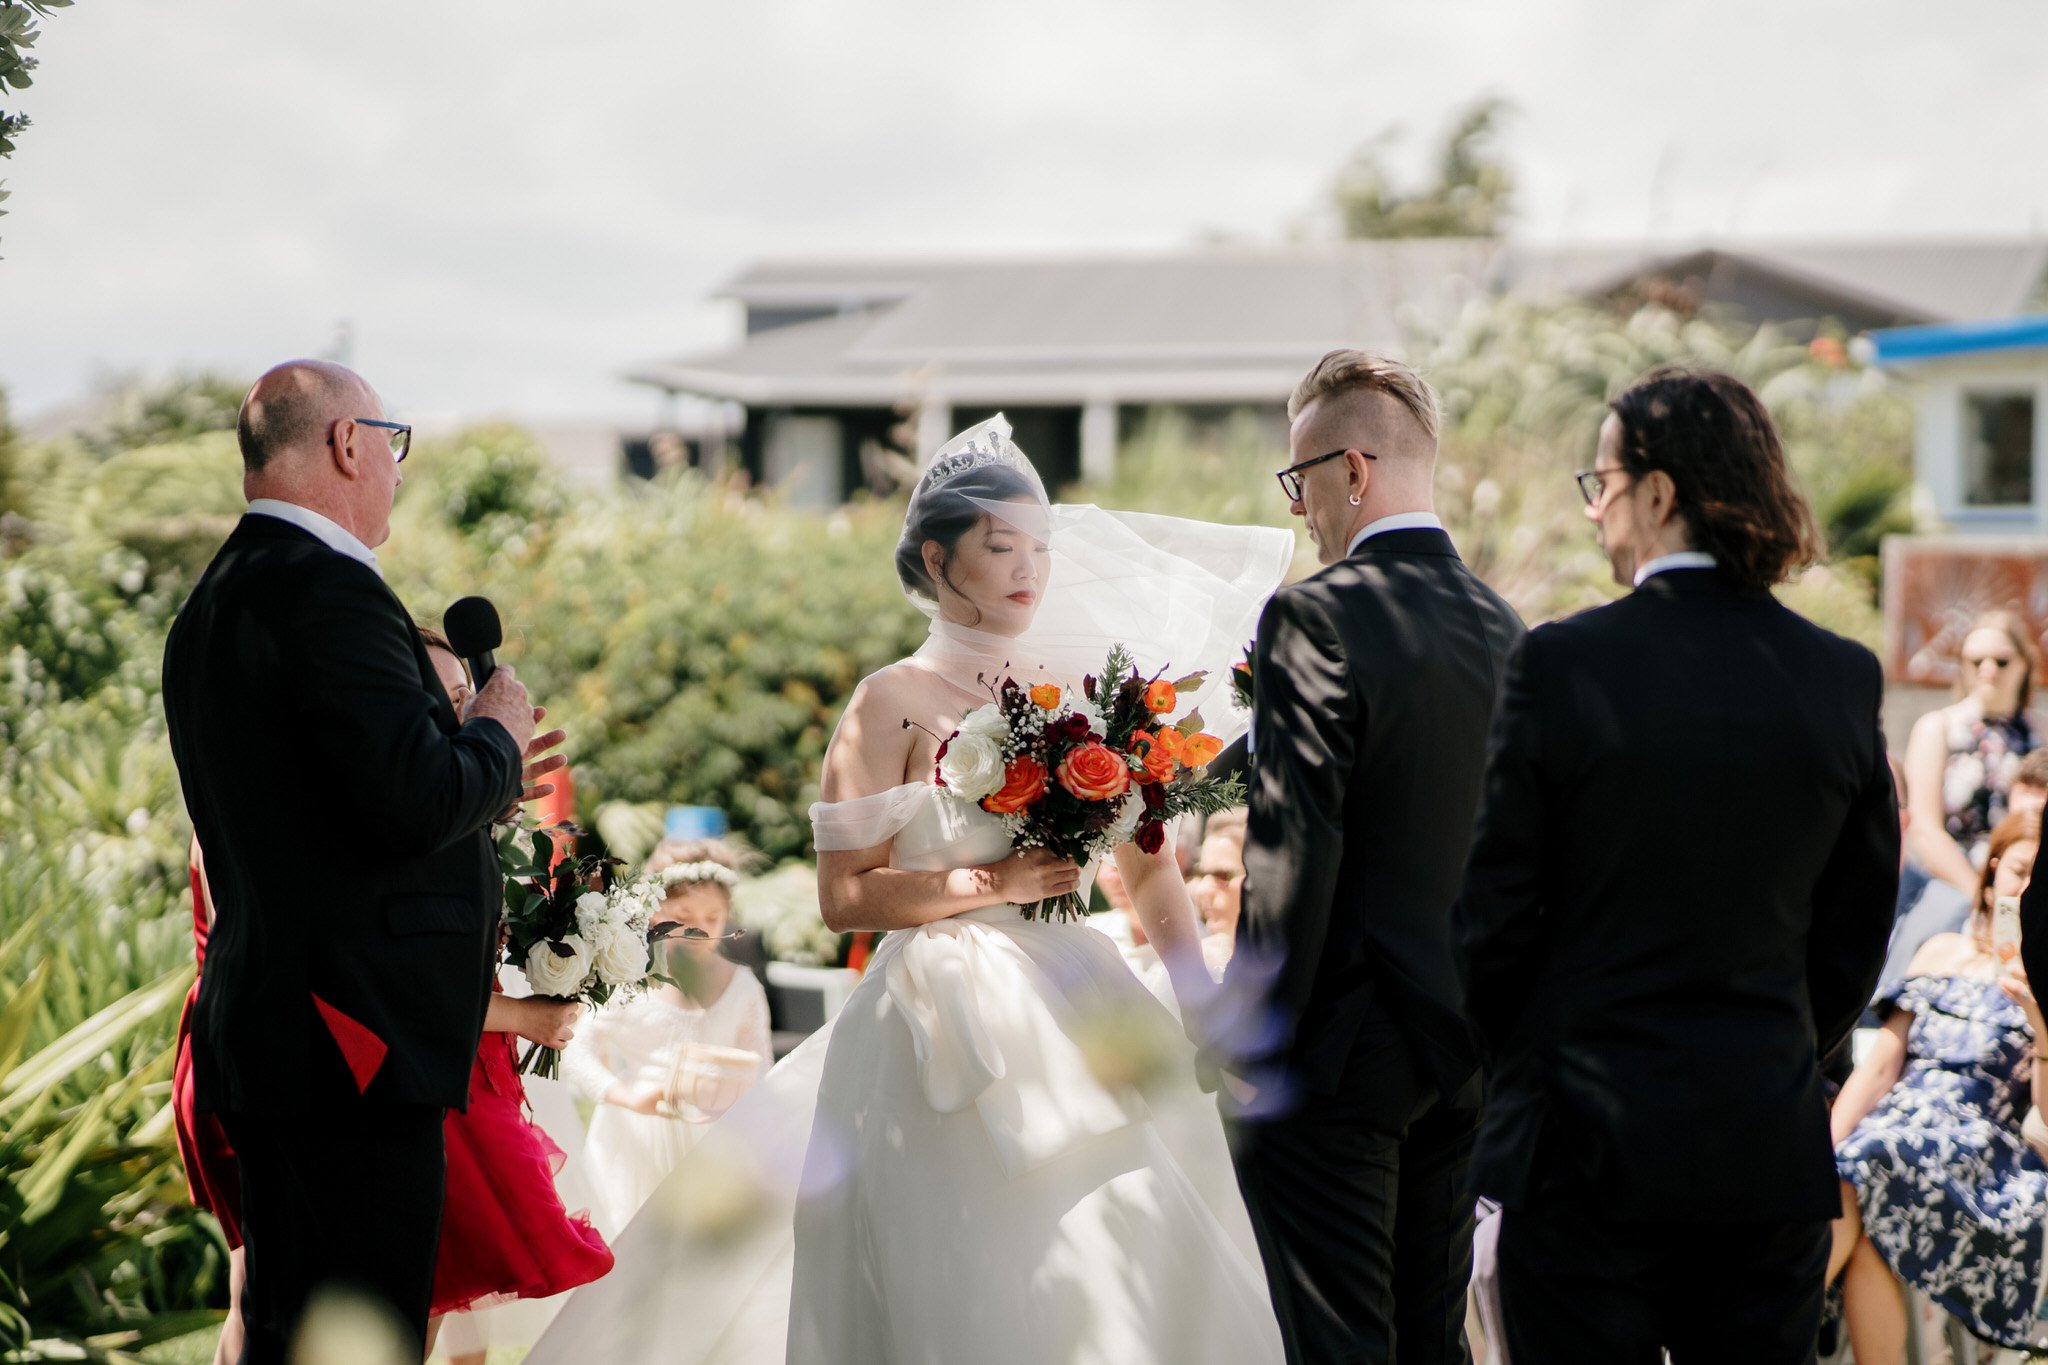 huntly-house-auckland-wedding-venue-mansion-vintage-luxury-accommodation-photographer-videography-dear-white-productions-photo-film-south-clarks-beach (62).jpg